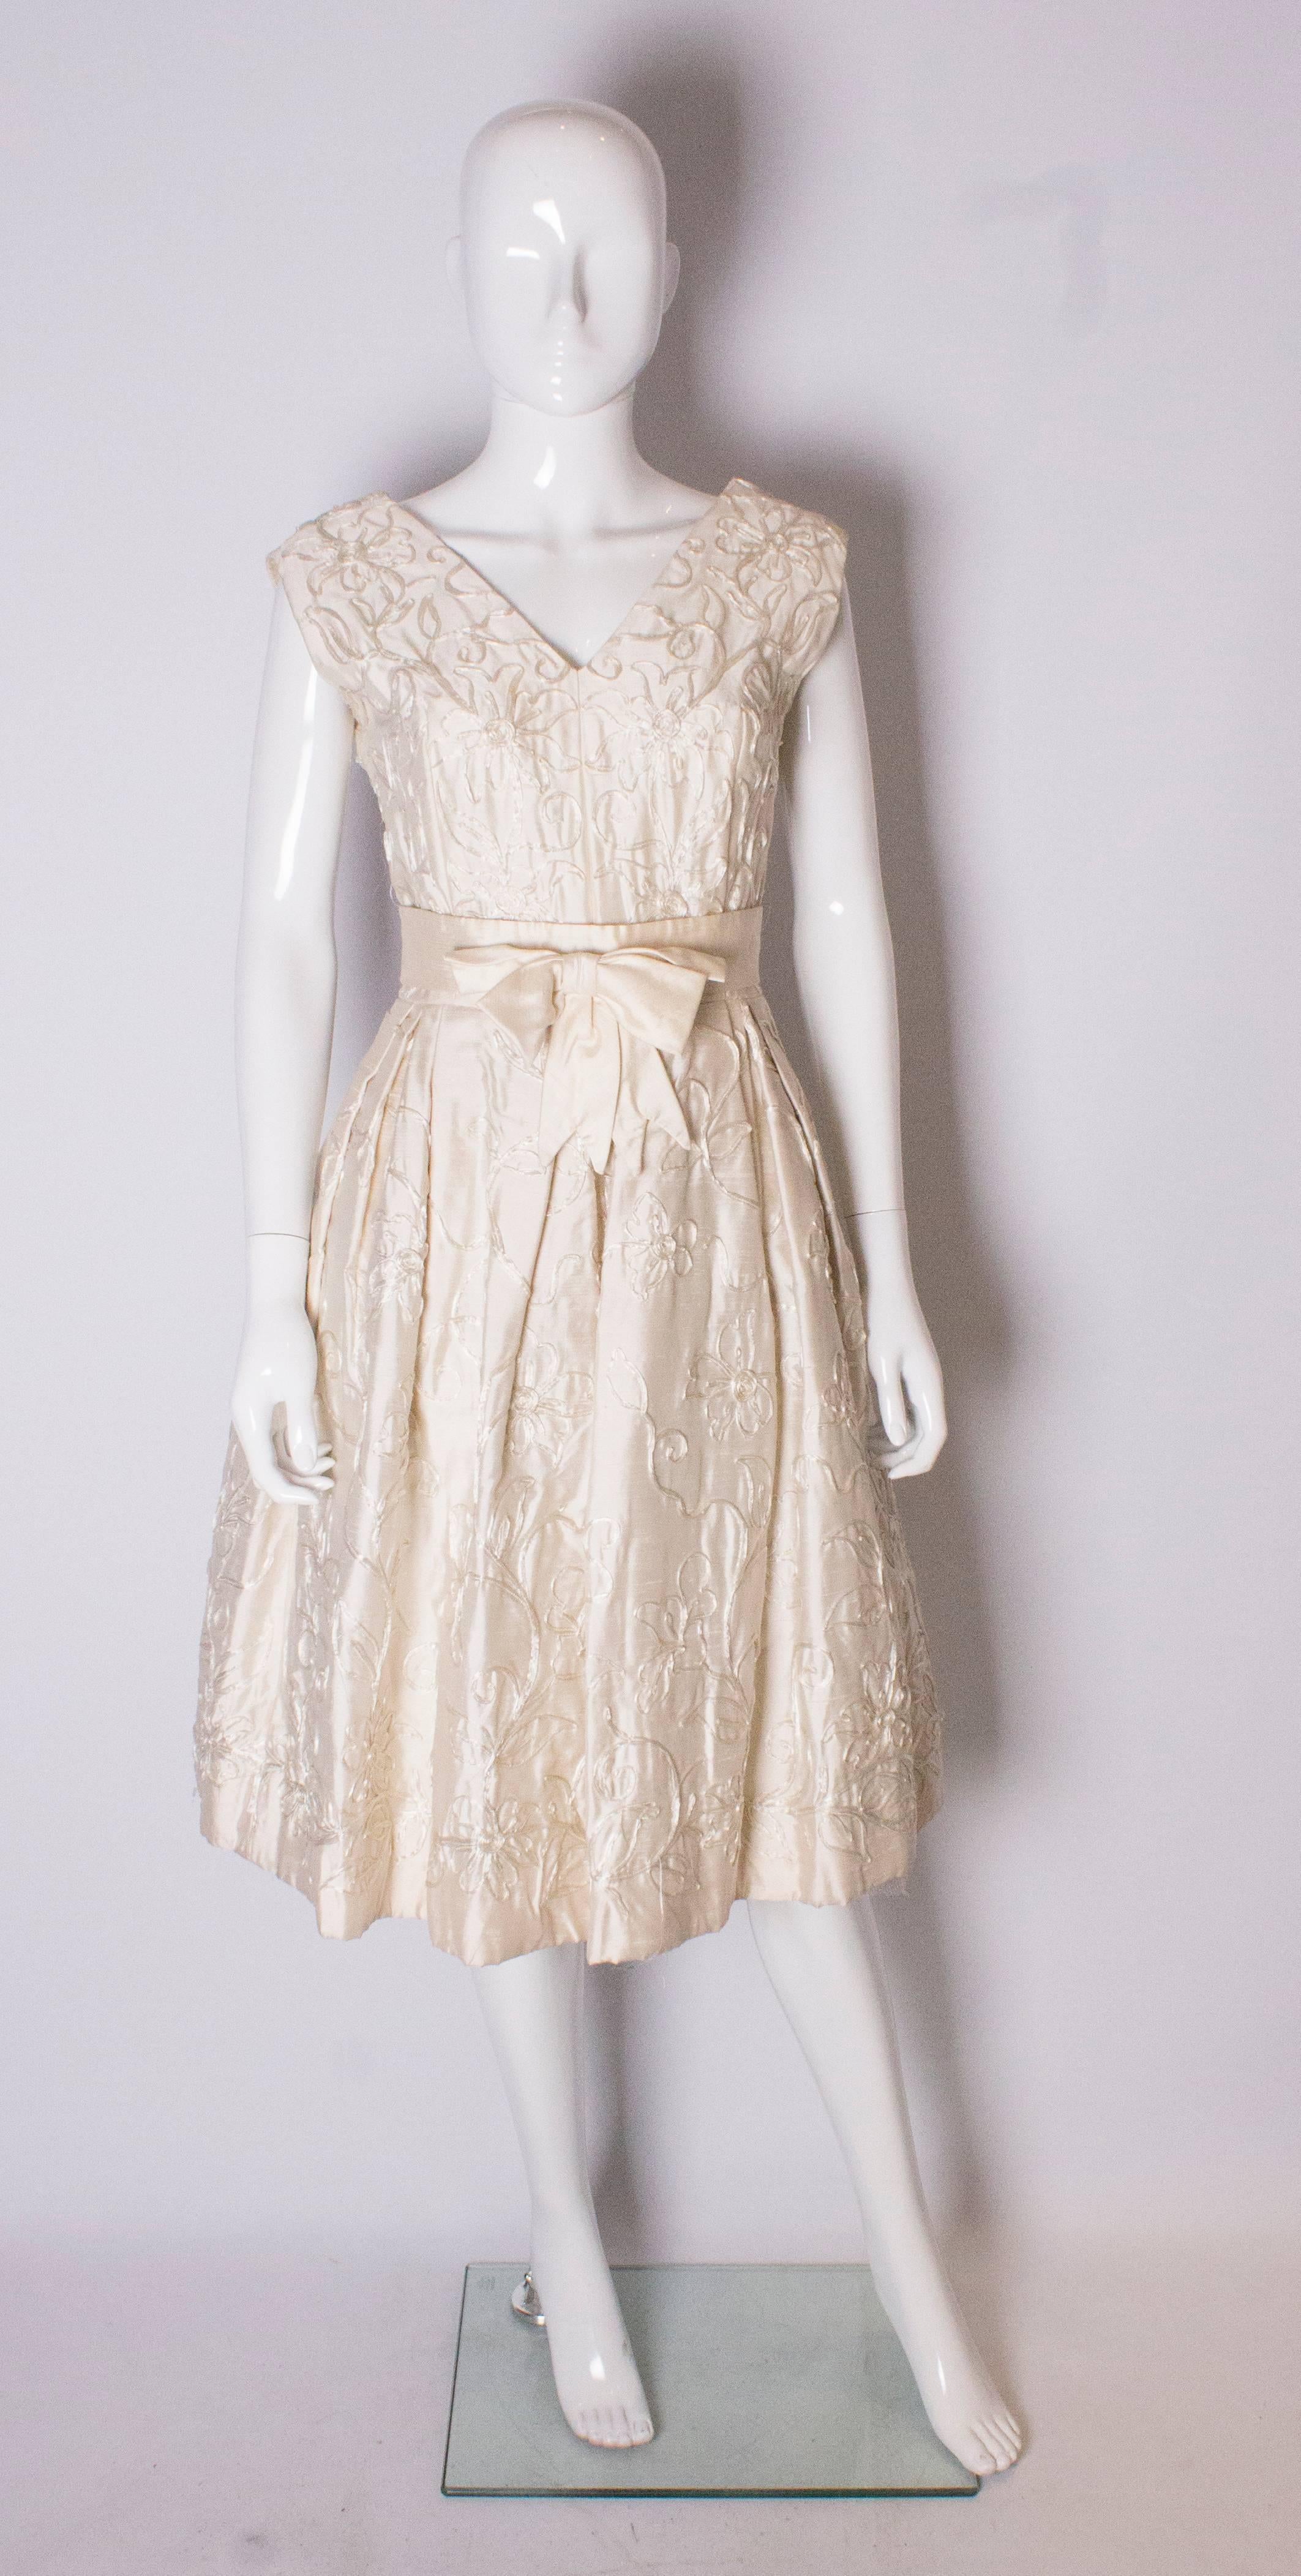 A wonderful 1950s cocktail dress or possible wedding dress. The dress is in an ivory silk mix fabric, with ribbon detail. The dress has a v neckline front and back, with a central back zip and two layers of lining underneath to create a great skirt.